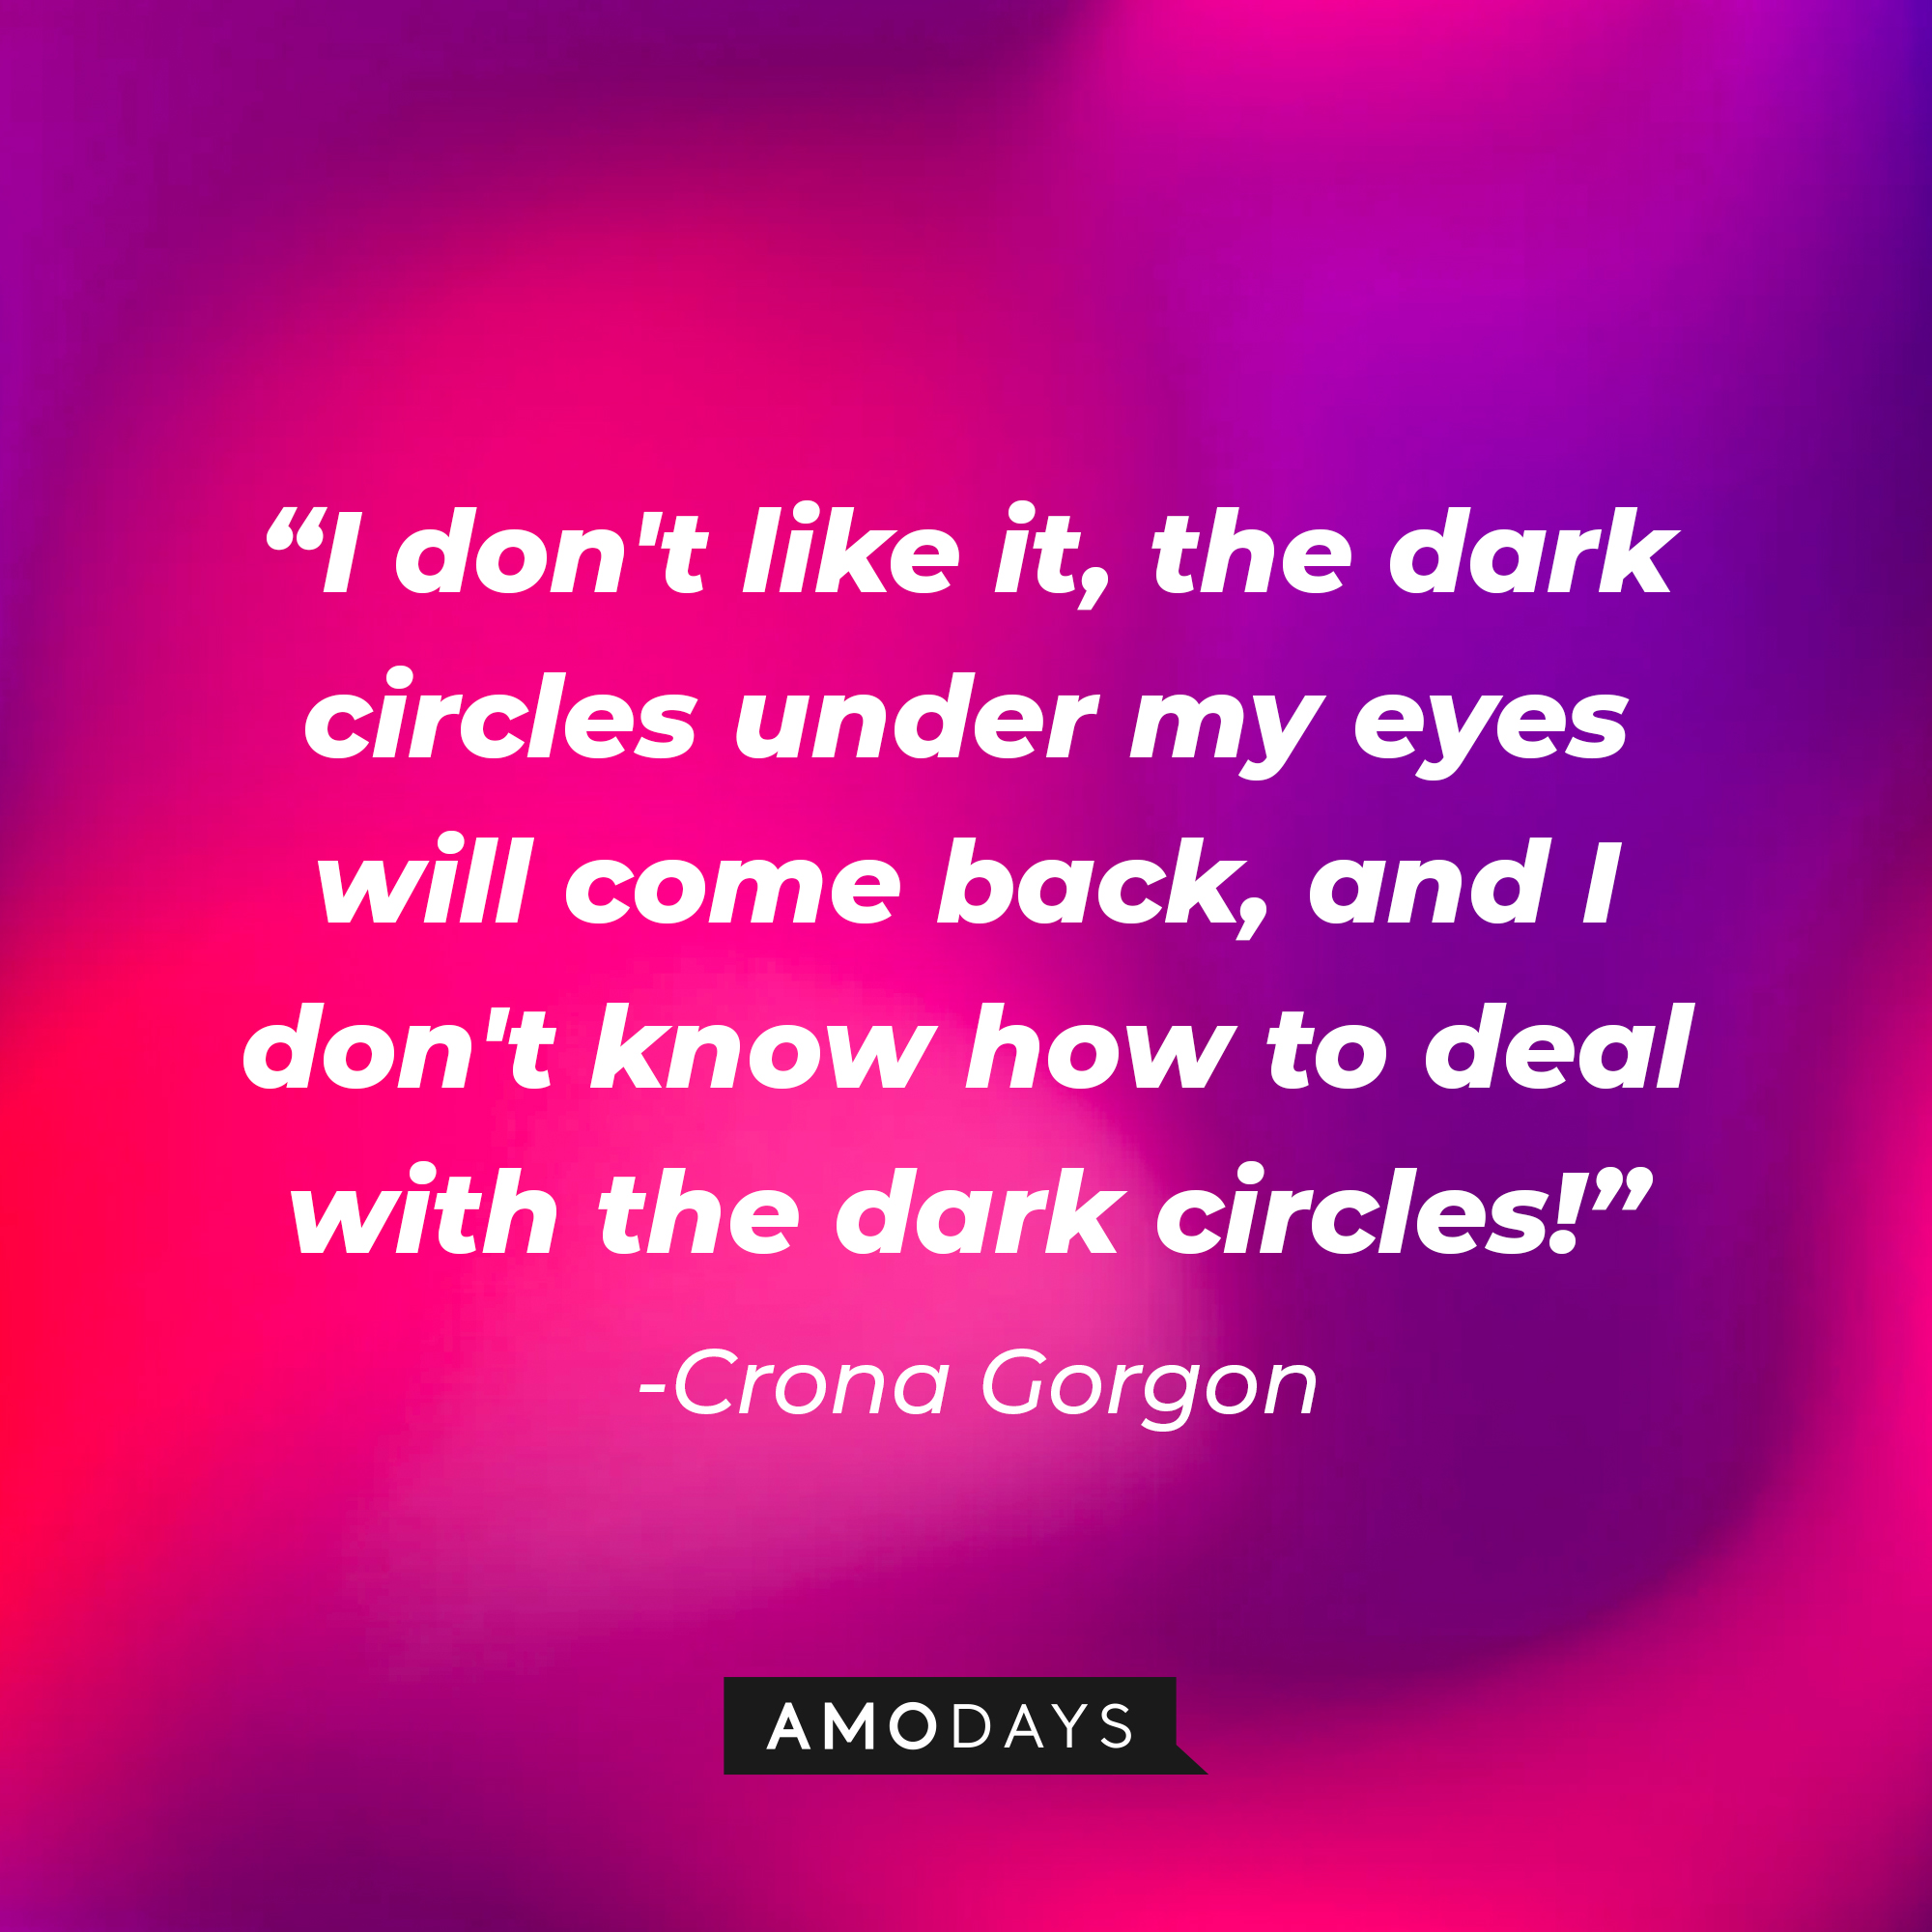 Crona Gorgon’s quote: "I don't like it, the dark circles under my eyes will come back, and I don't know how to deal with the dark circles!" | Image: AmoDays